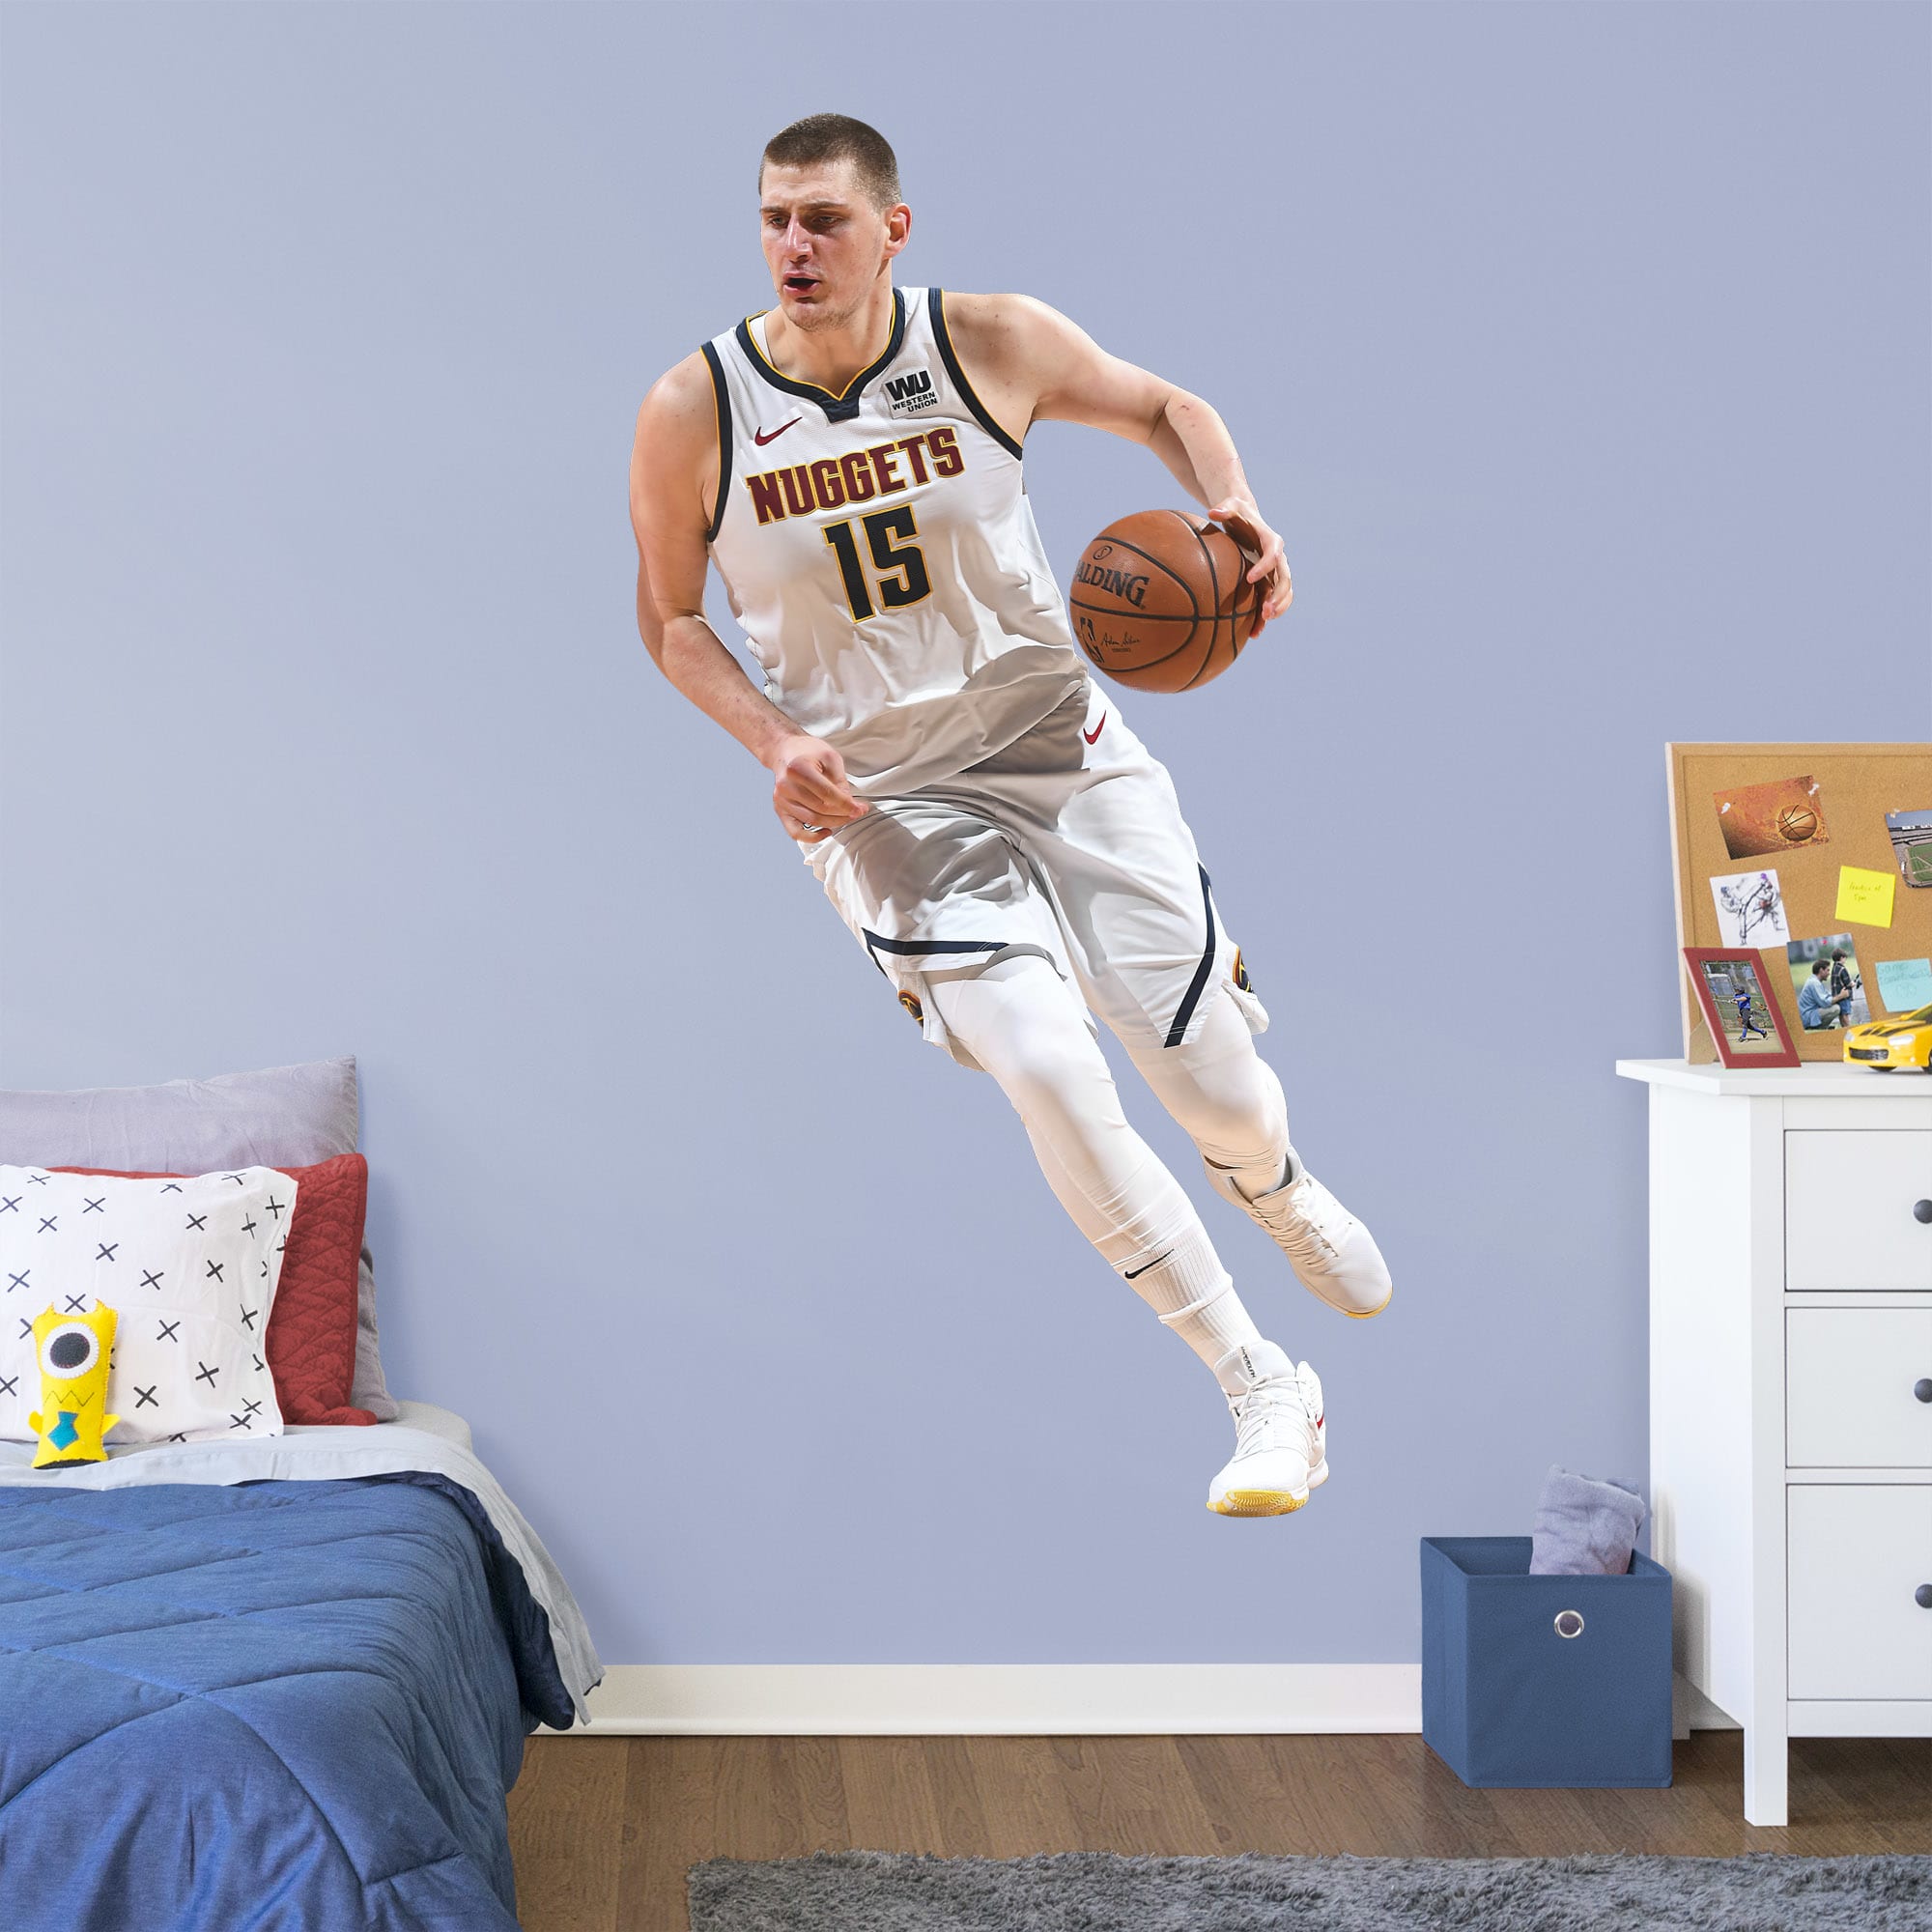 Nikola Jokic for Denver Nuggets - Officially Licensed NBA Removable Wall Decal Life-Size Athlete + 2 Decals (42"W x 78"H) by Fat